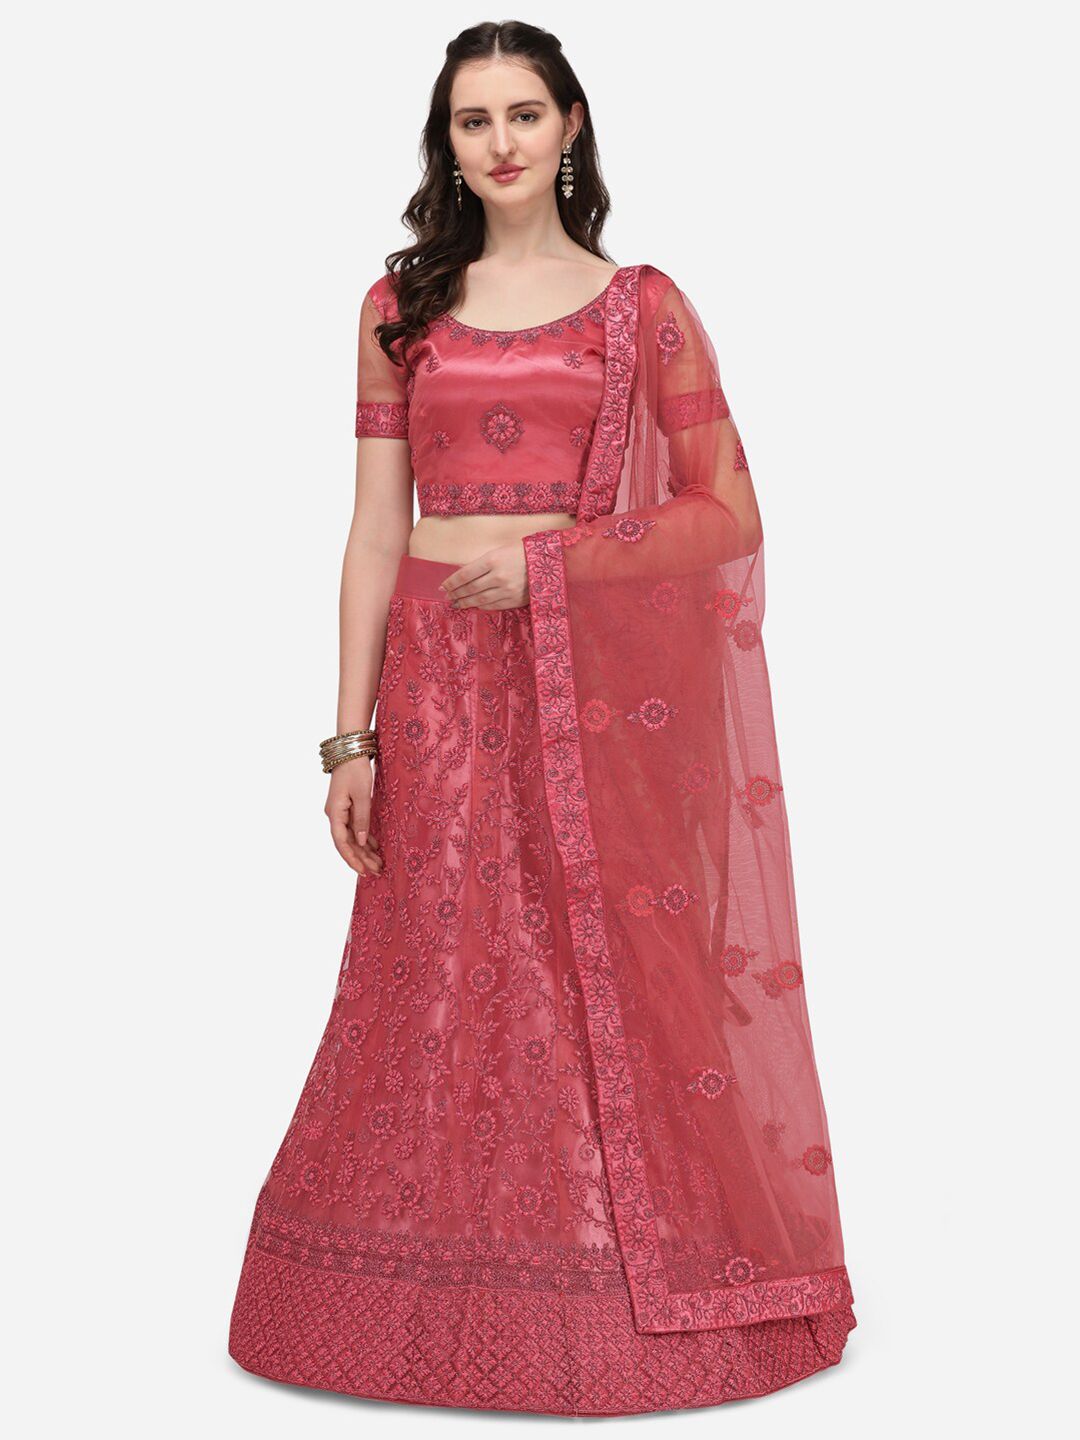 Netram Pink Embroidered Beads and Stones Semi-Stitched Lehenga & Unstitched Blouse With Dupatta Price in India